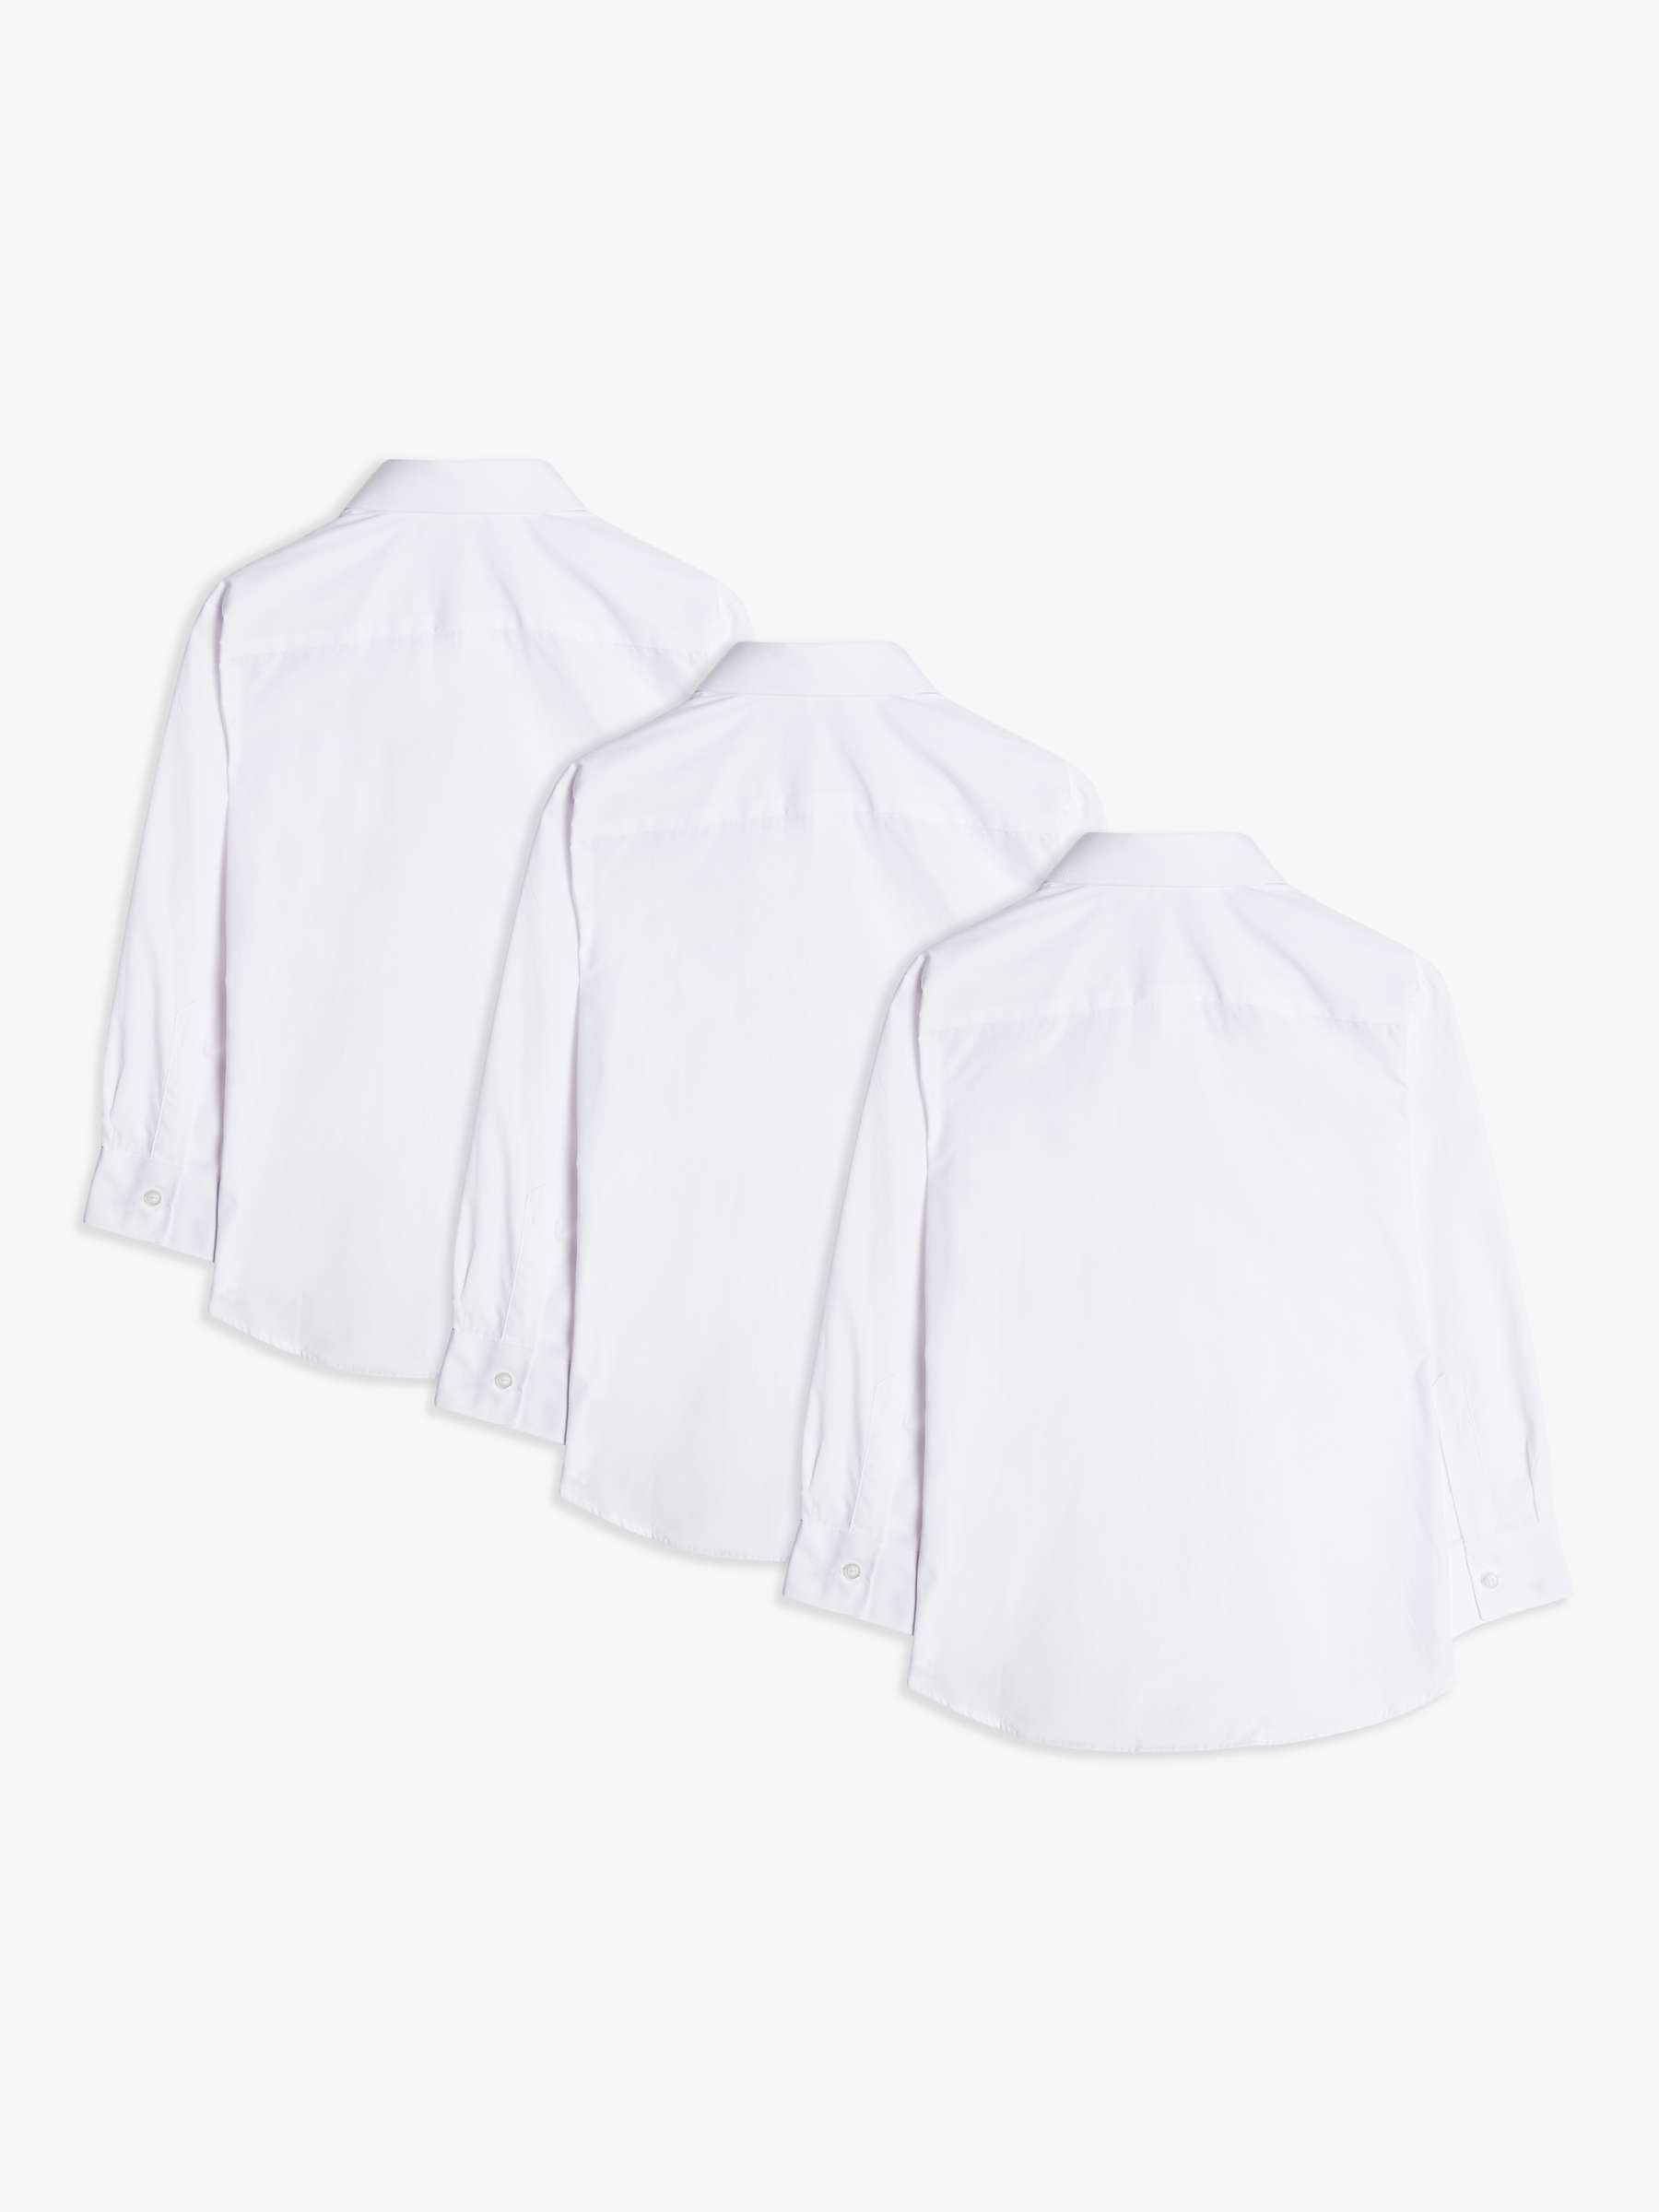 Buy John Lewis ANYDAY Long Sleeved Shirt, Pack of 3, White Online at johnlewis.com